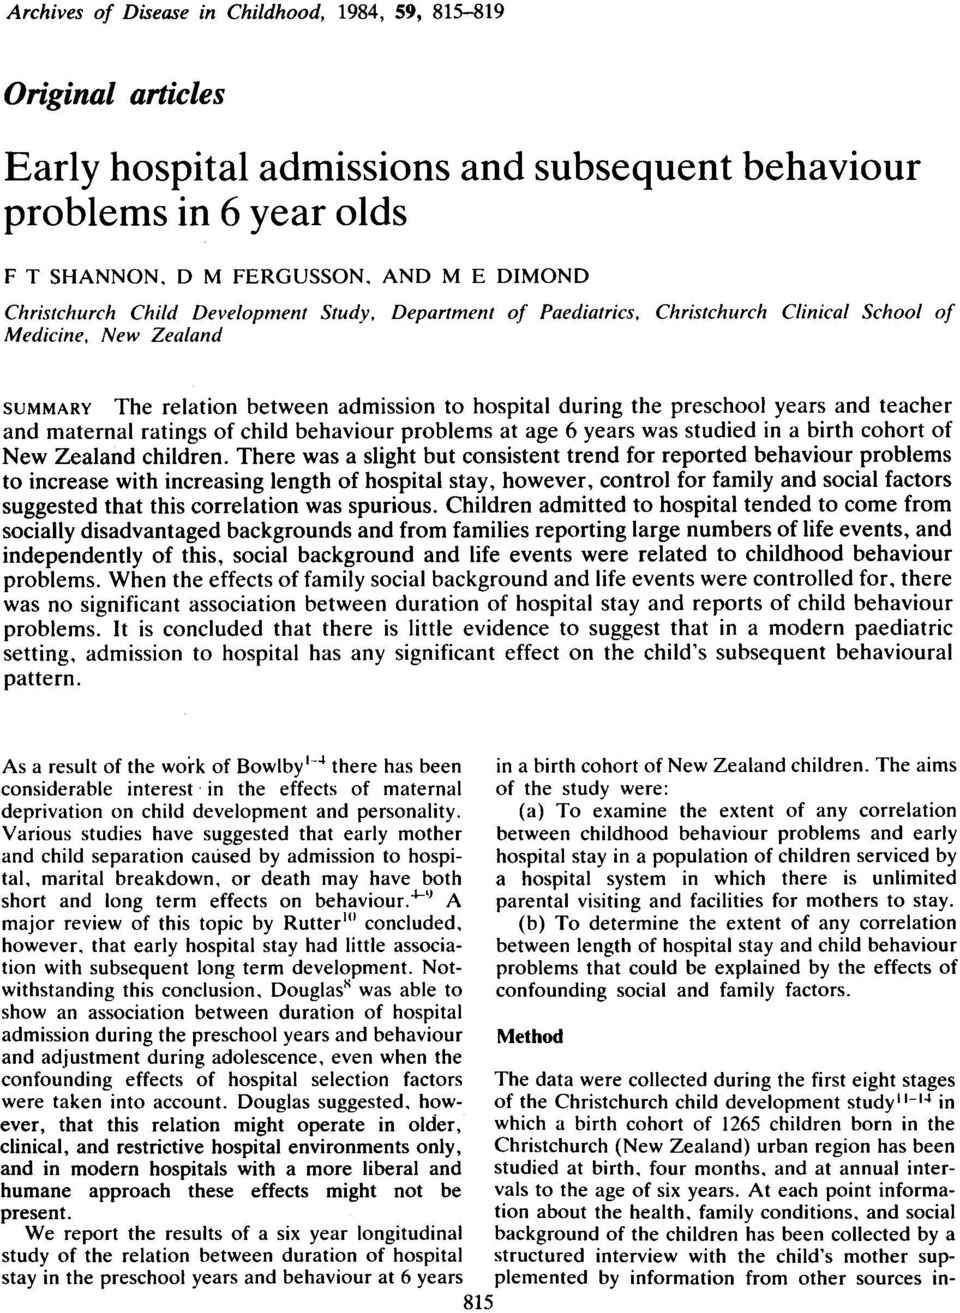 during the preschool years and teacher and maternal ratings of child behaviour problems at age 6 years was studied in a birth cohort of New Zealand children.